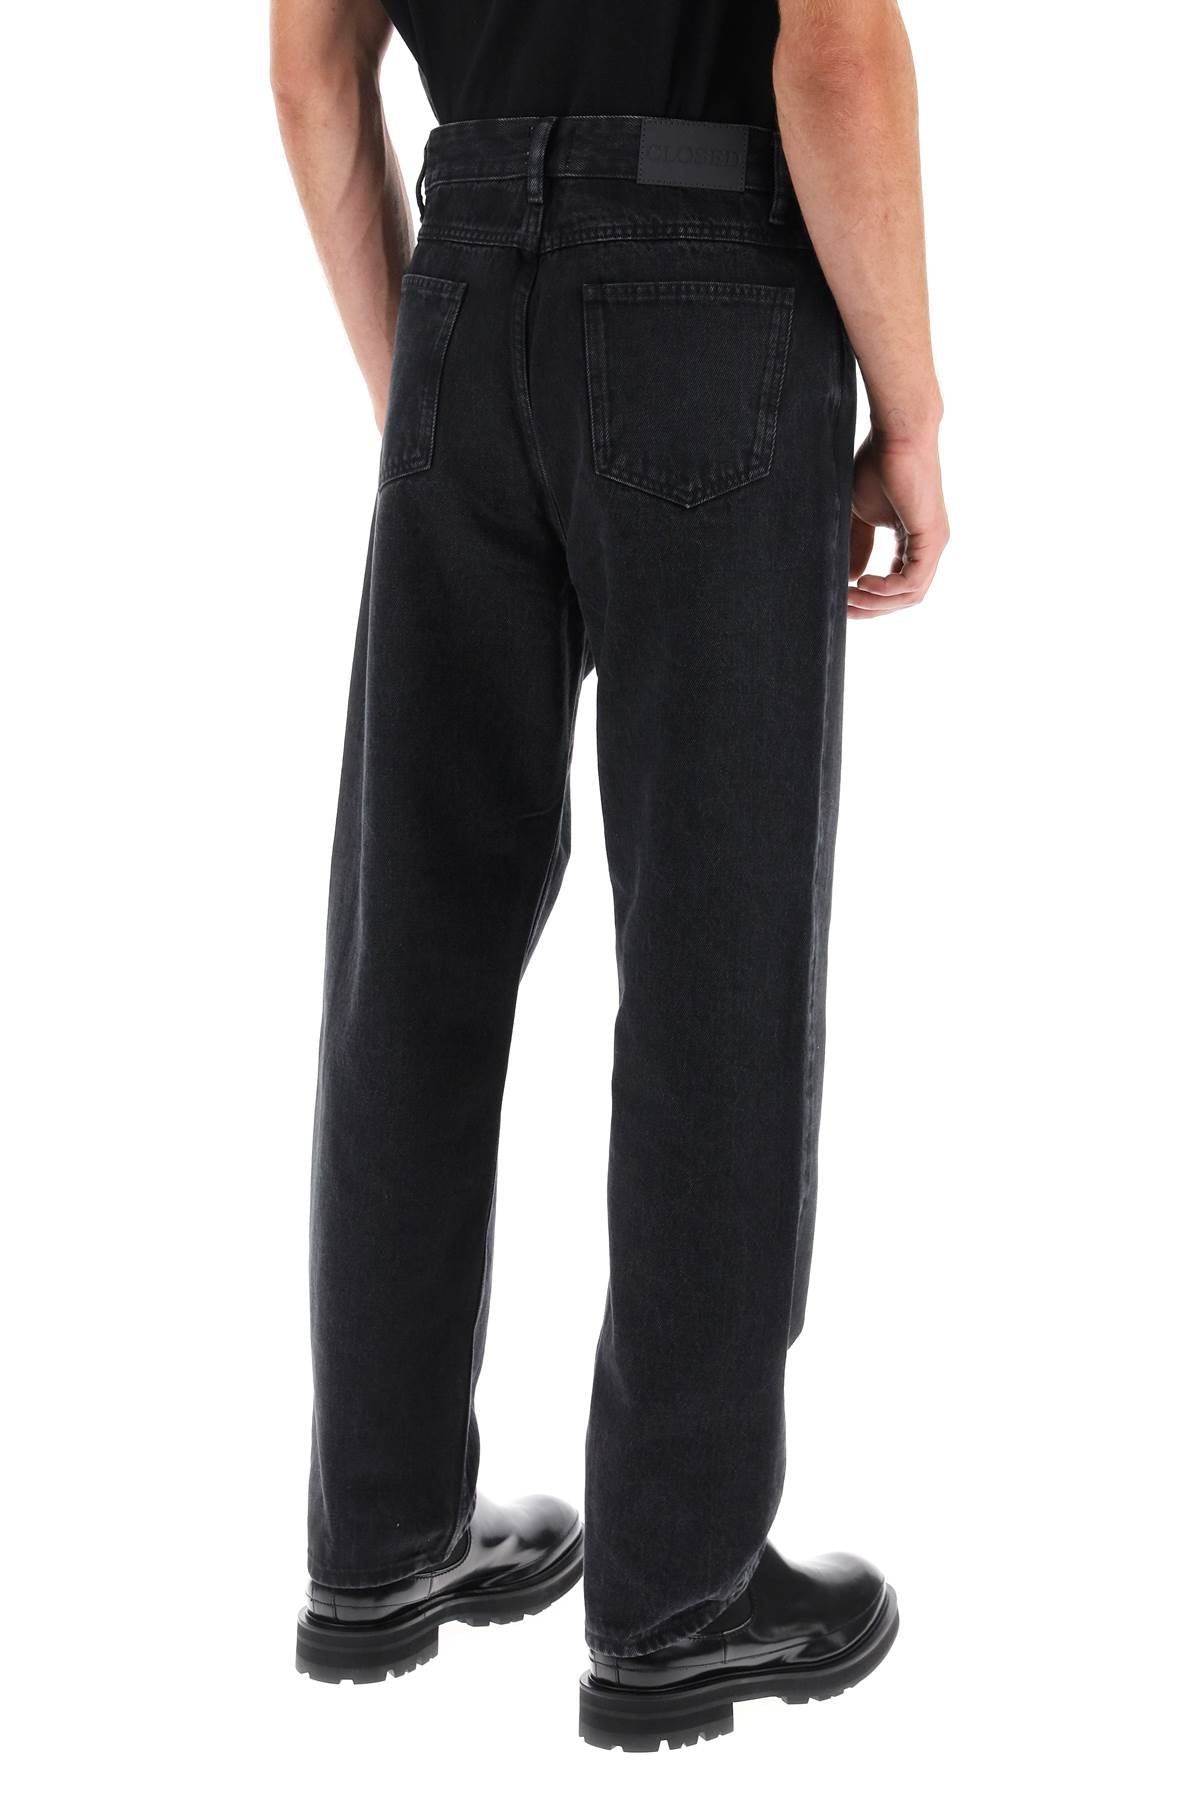 Closed Closed regular fit jeans with tapered leg